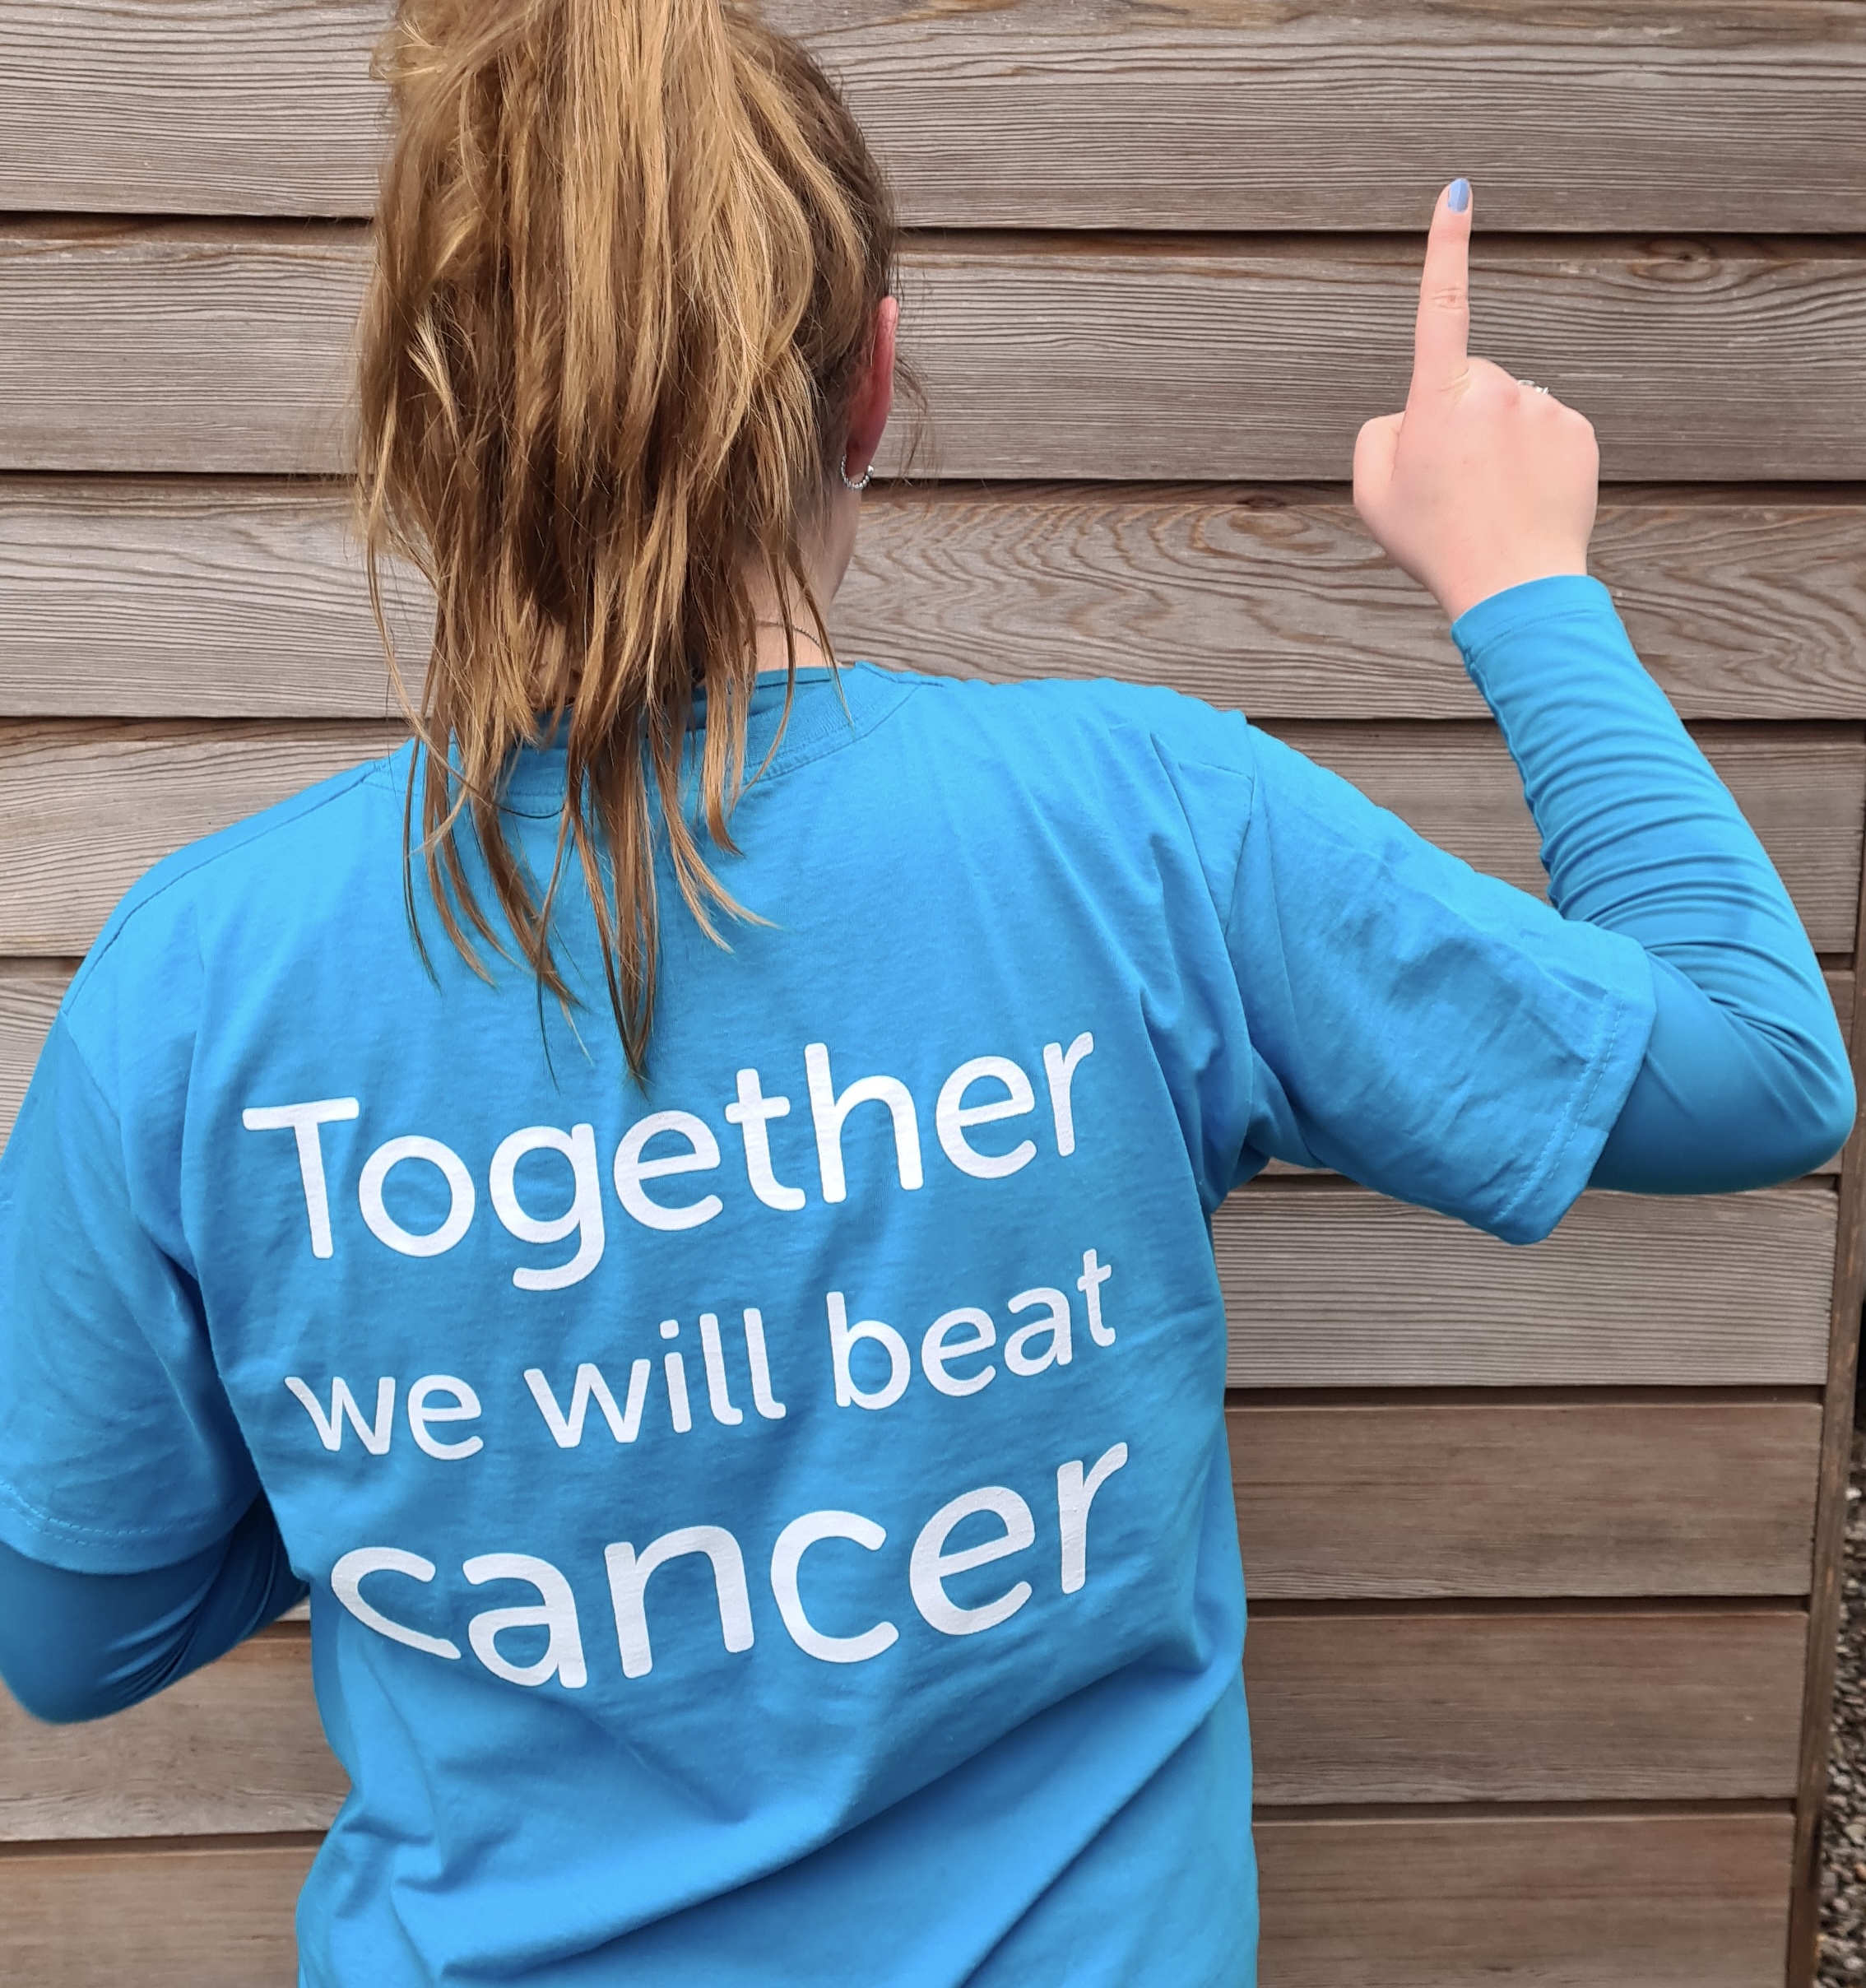 CHARITY | Millie Davies is Raising money for Cancer Research UK